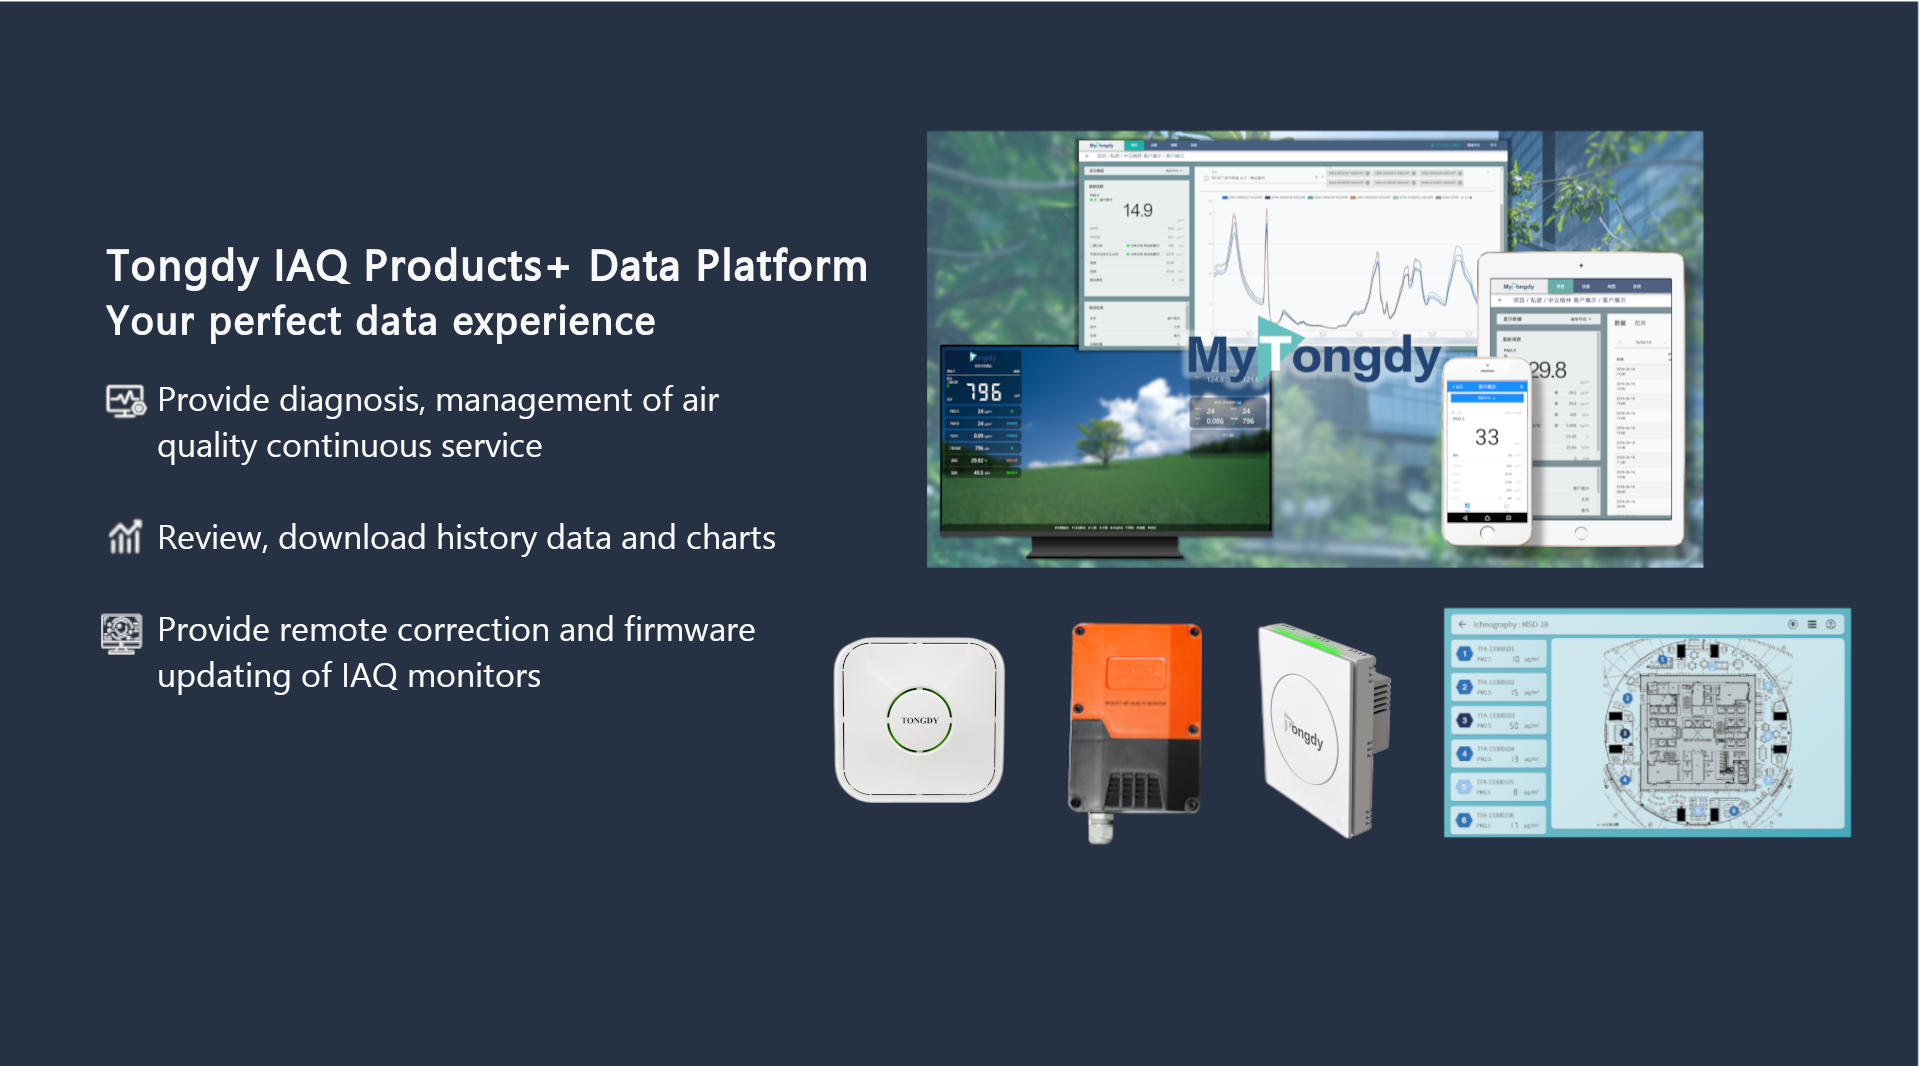 Tongdy IAQ Products+ Data Platform-Your perfect data experience